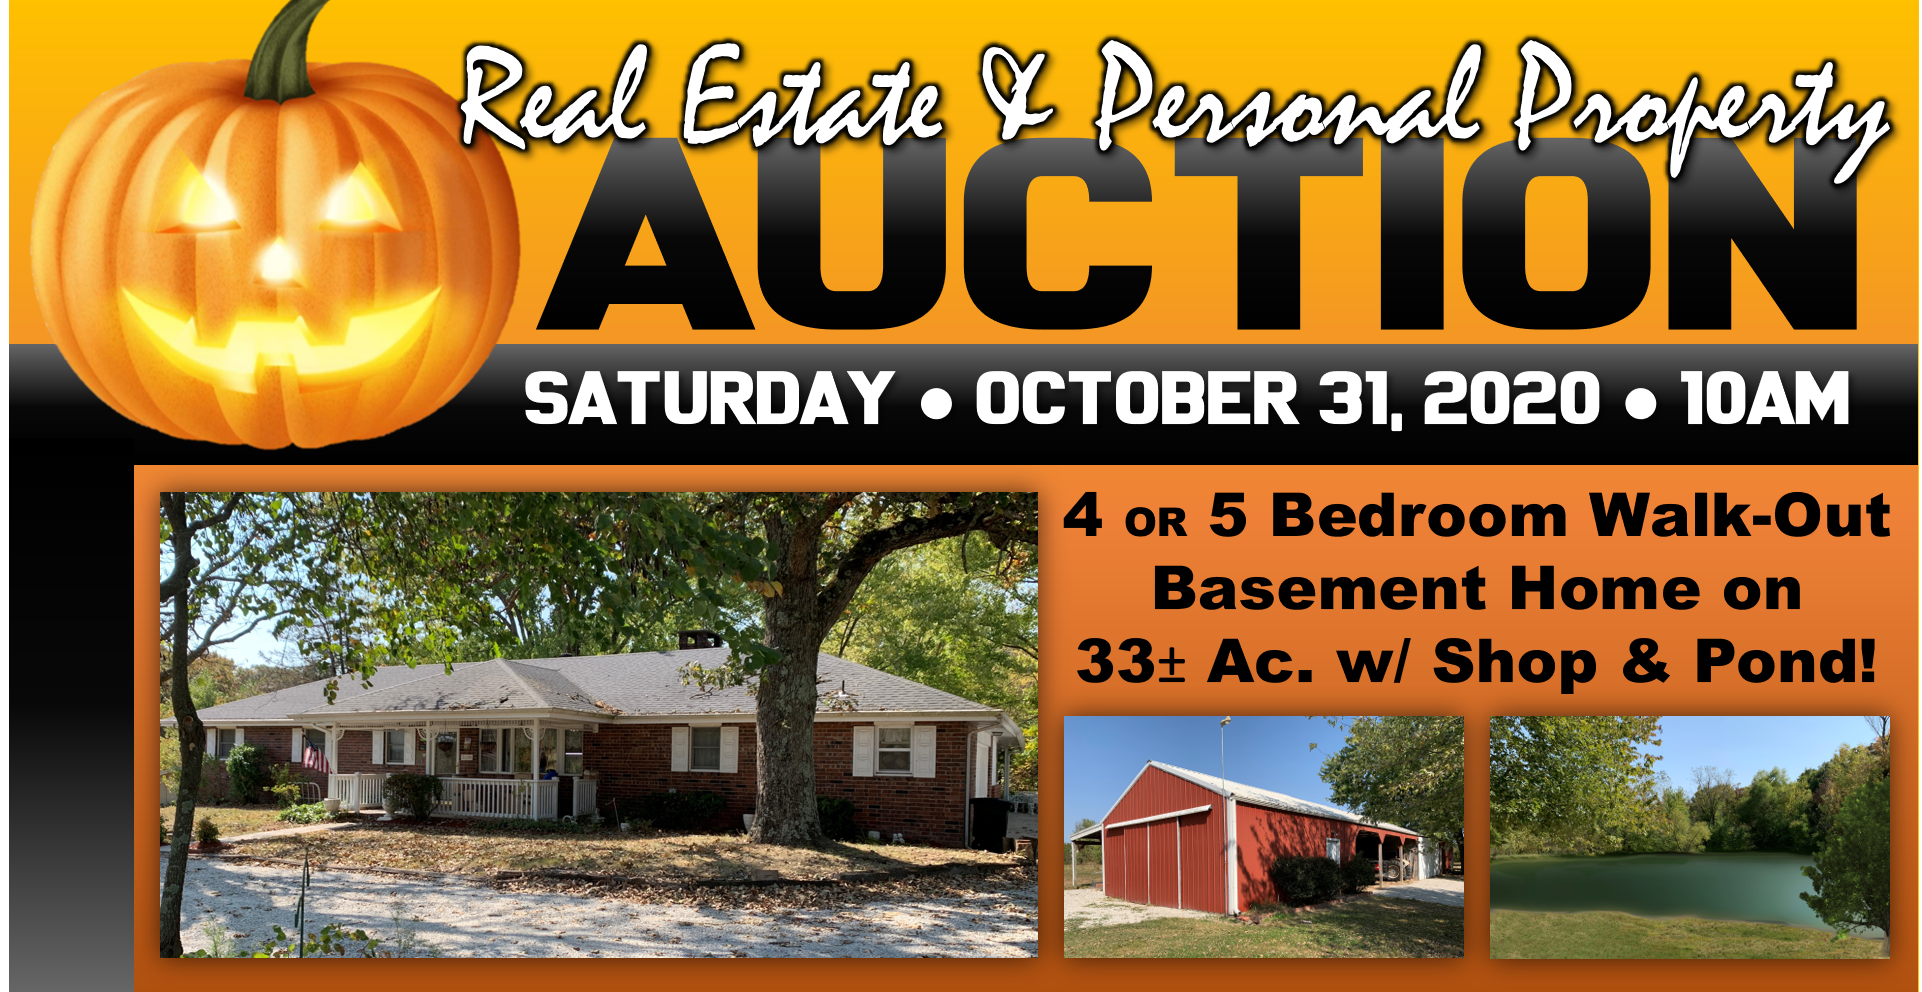 REAL ESTATE & PERSONAL PROPERTY AUCTION